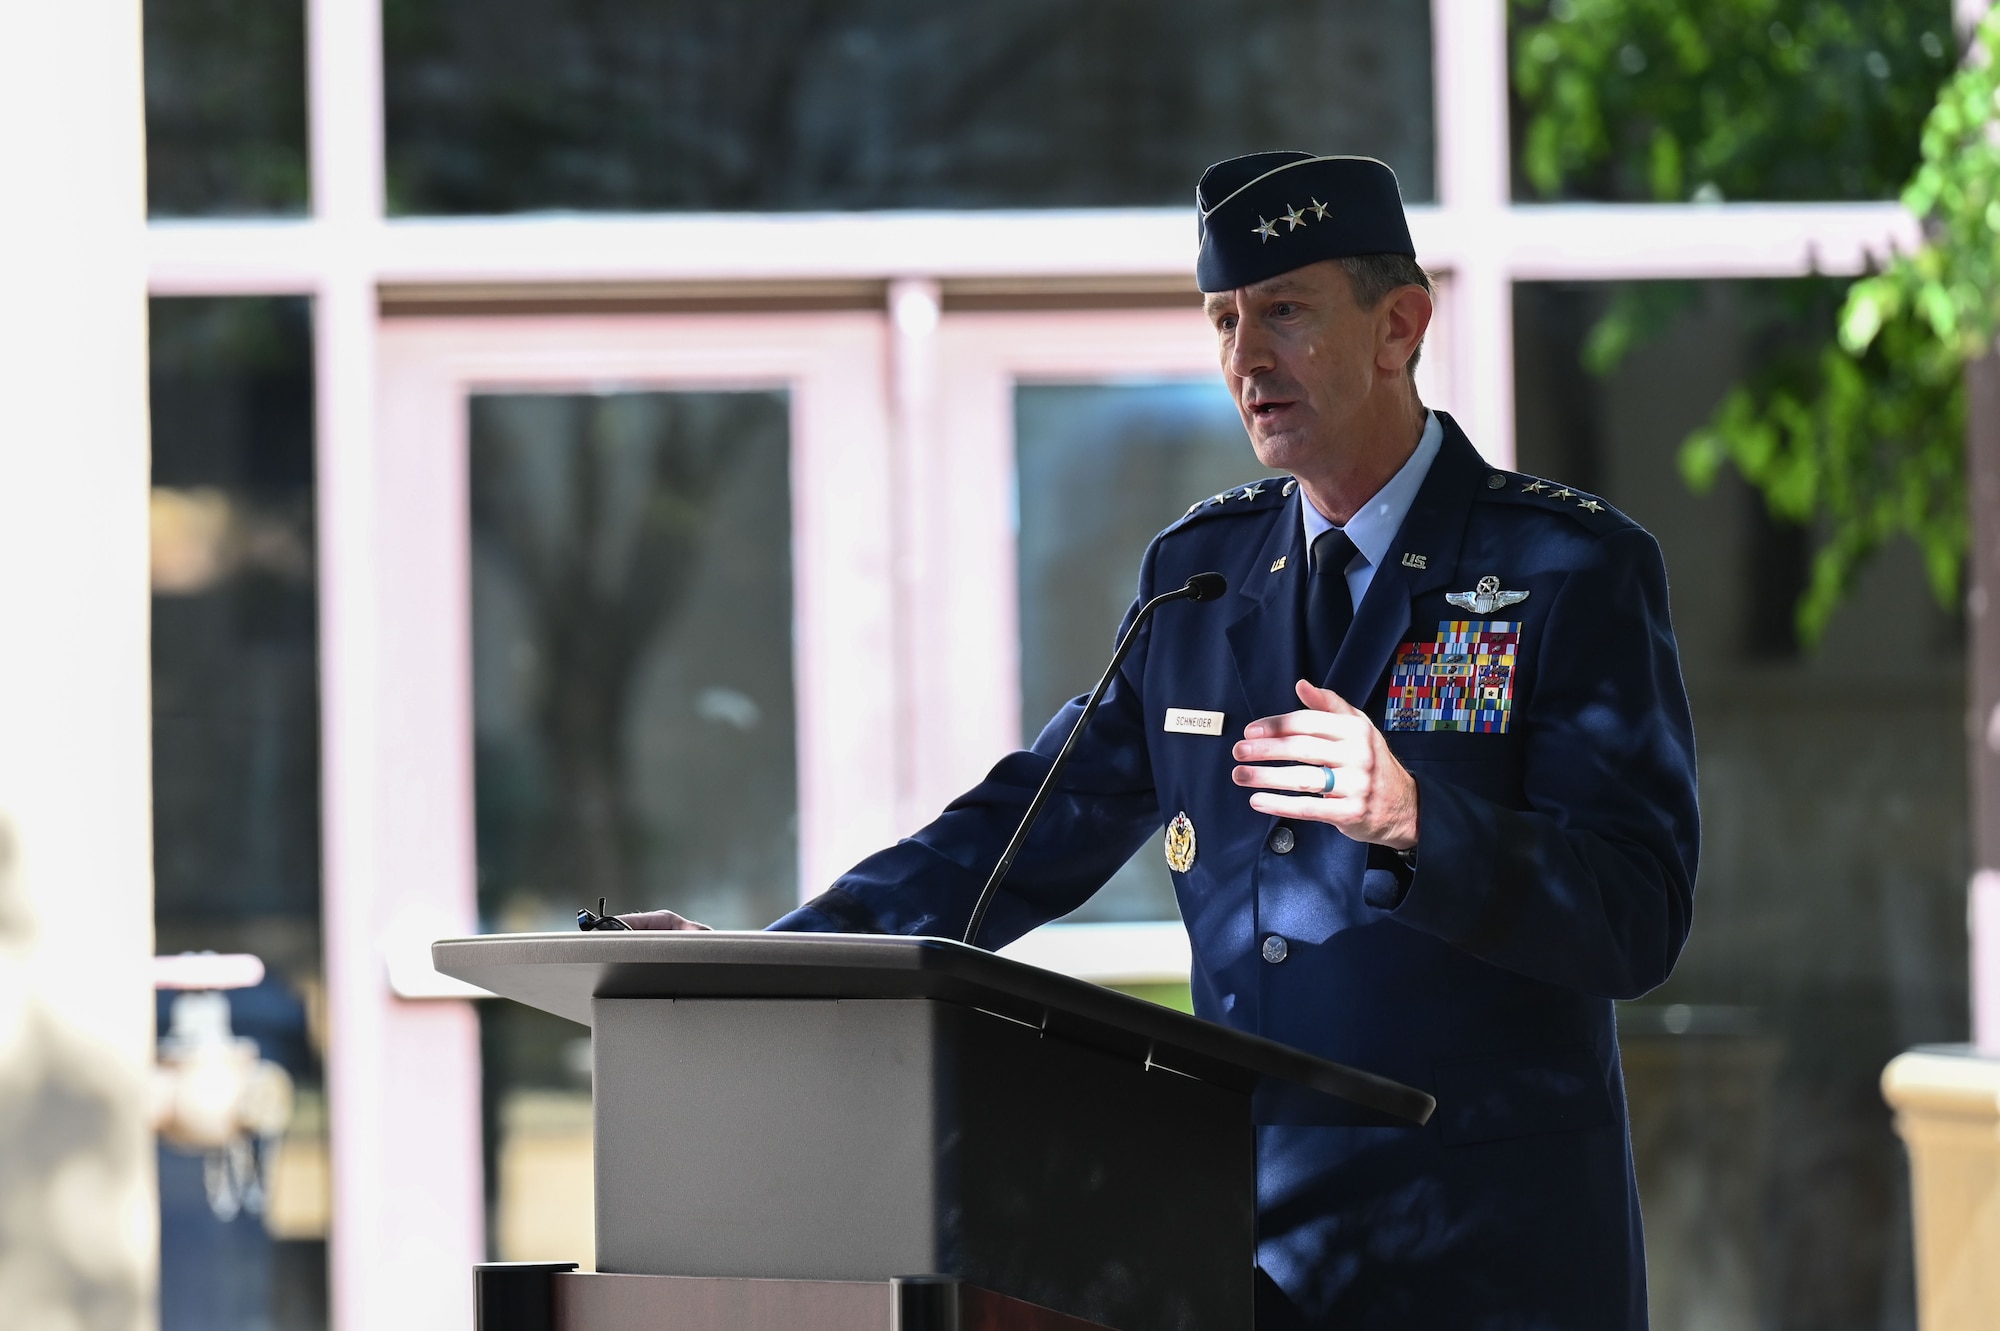 Lt. Gen. Kevin Schneider, left, United States Air Force Director of Staff delivers comments during the July 19, 2022 Air Force Operational Test and Evaluation Center Change of Command Ceremony.